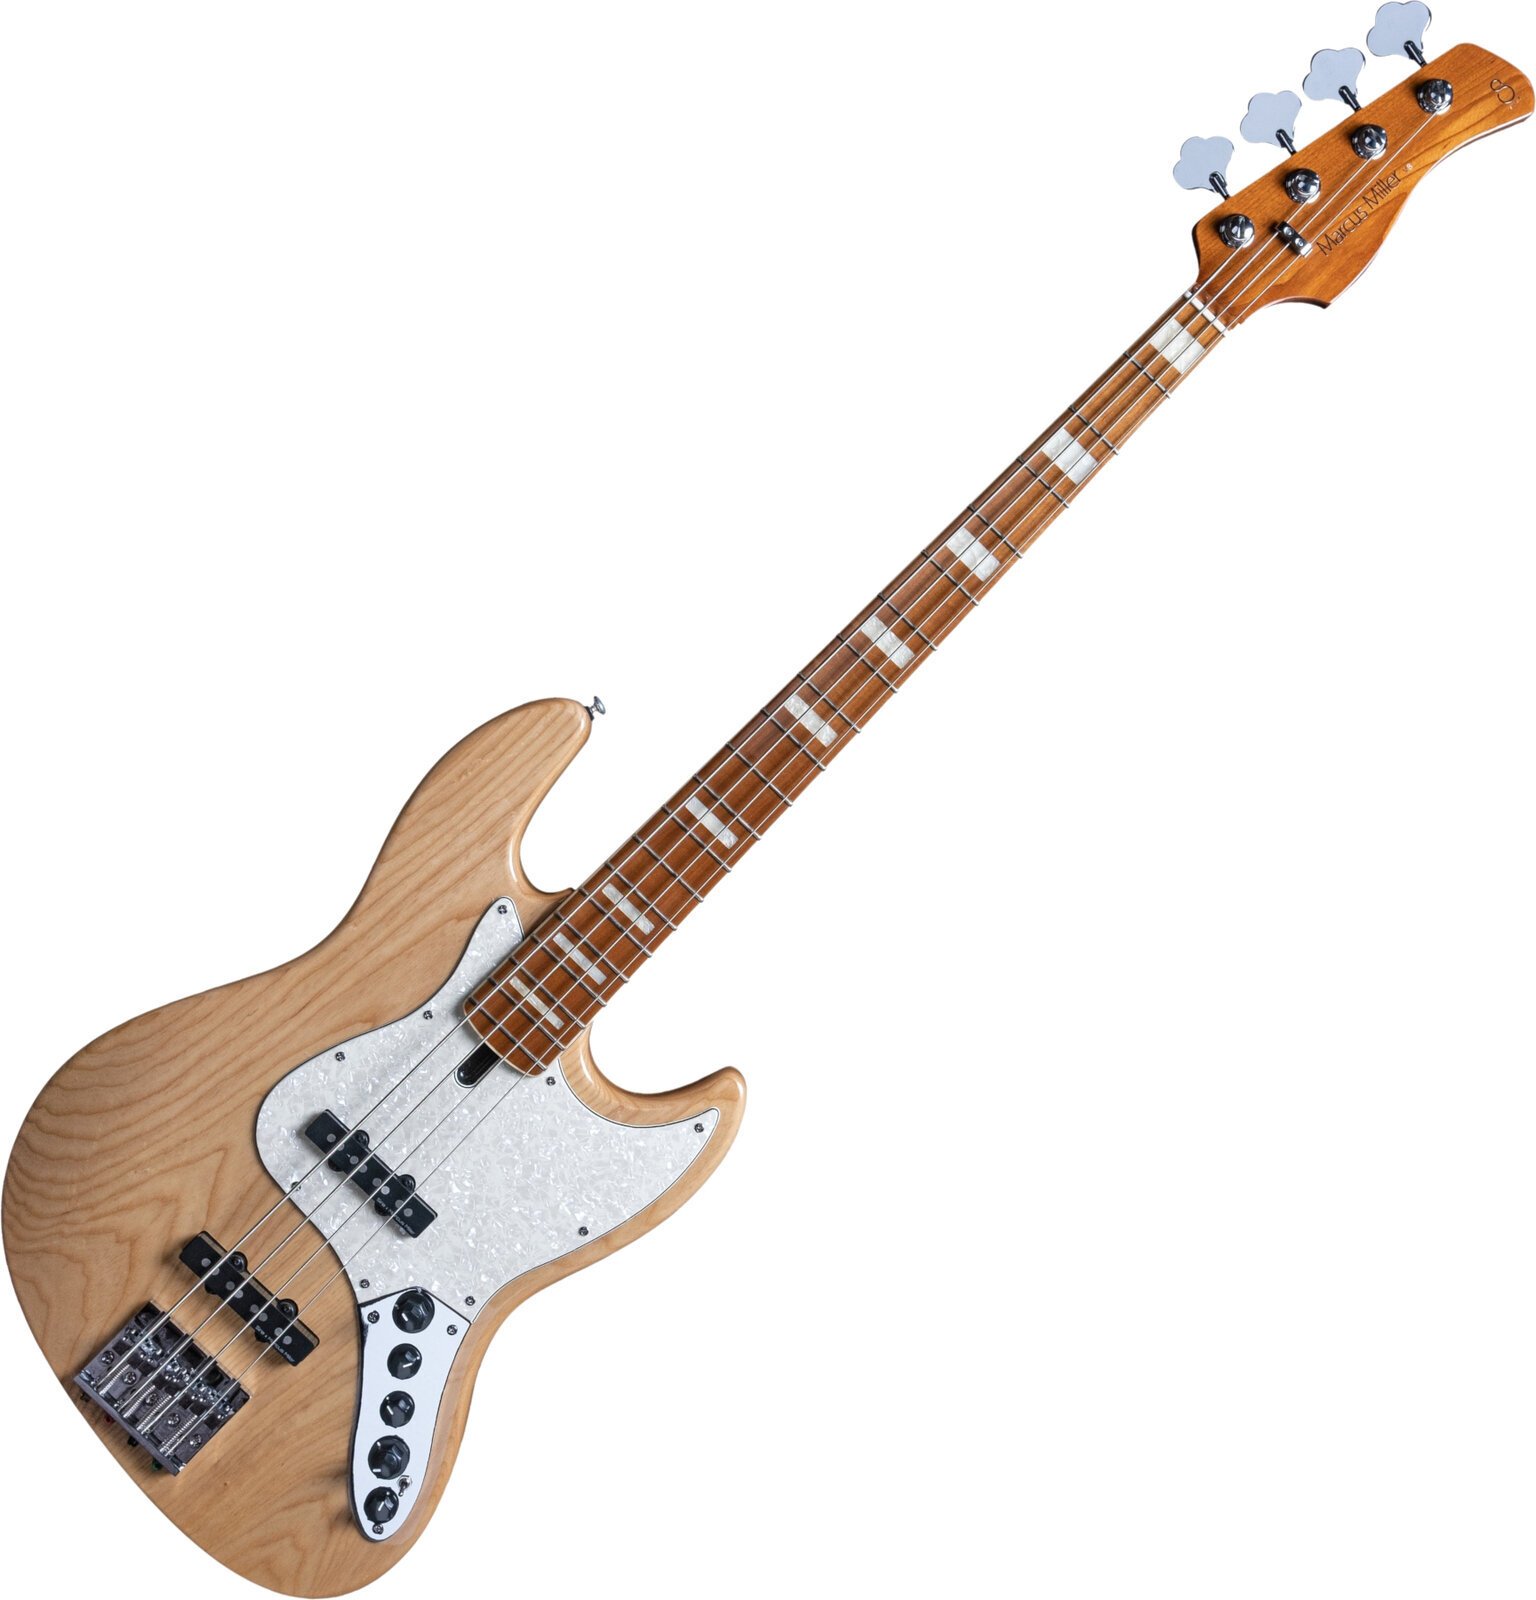 Basso Elettrico Sire Marcus Miller V8-4 Natural